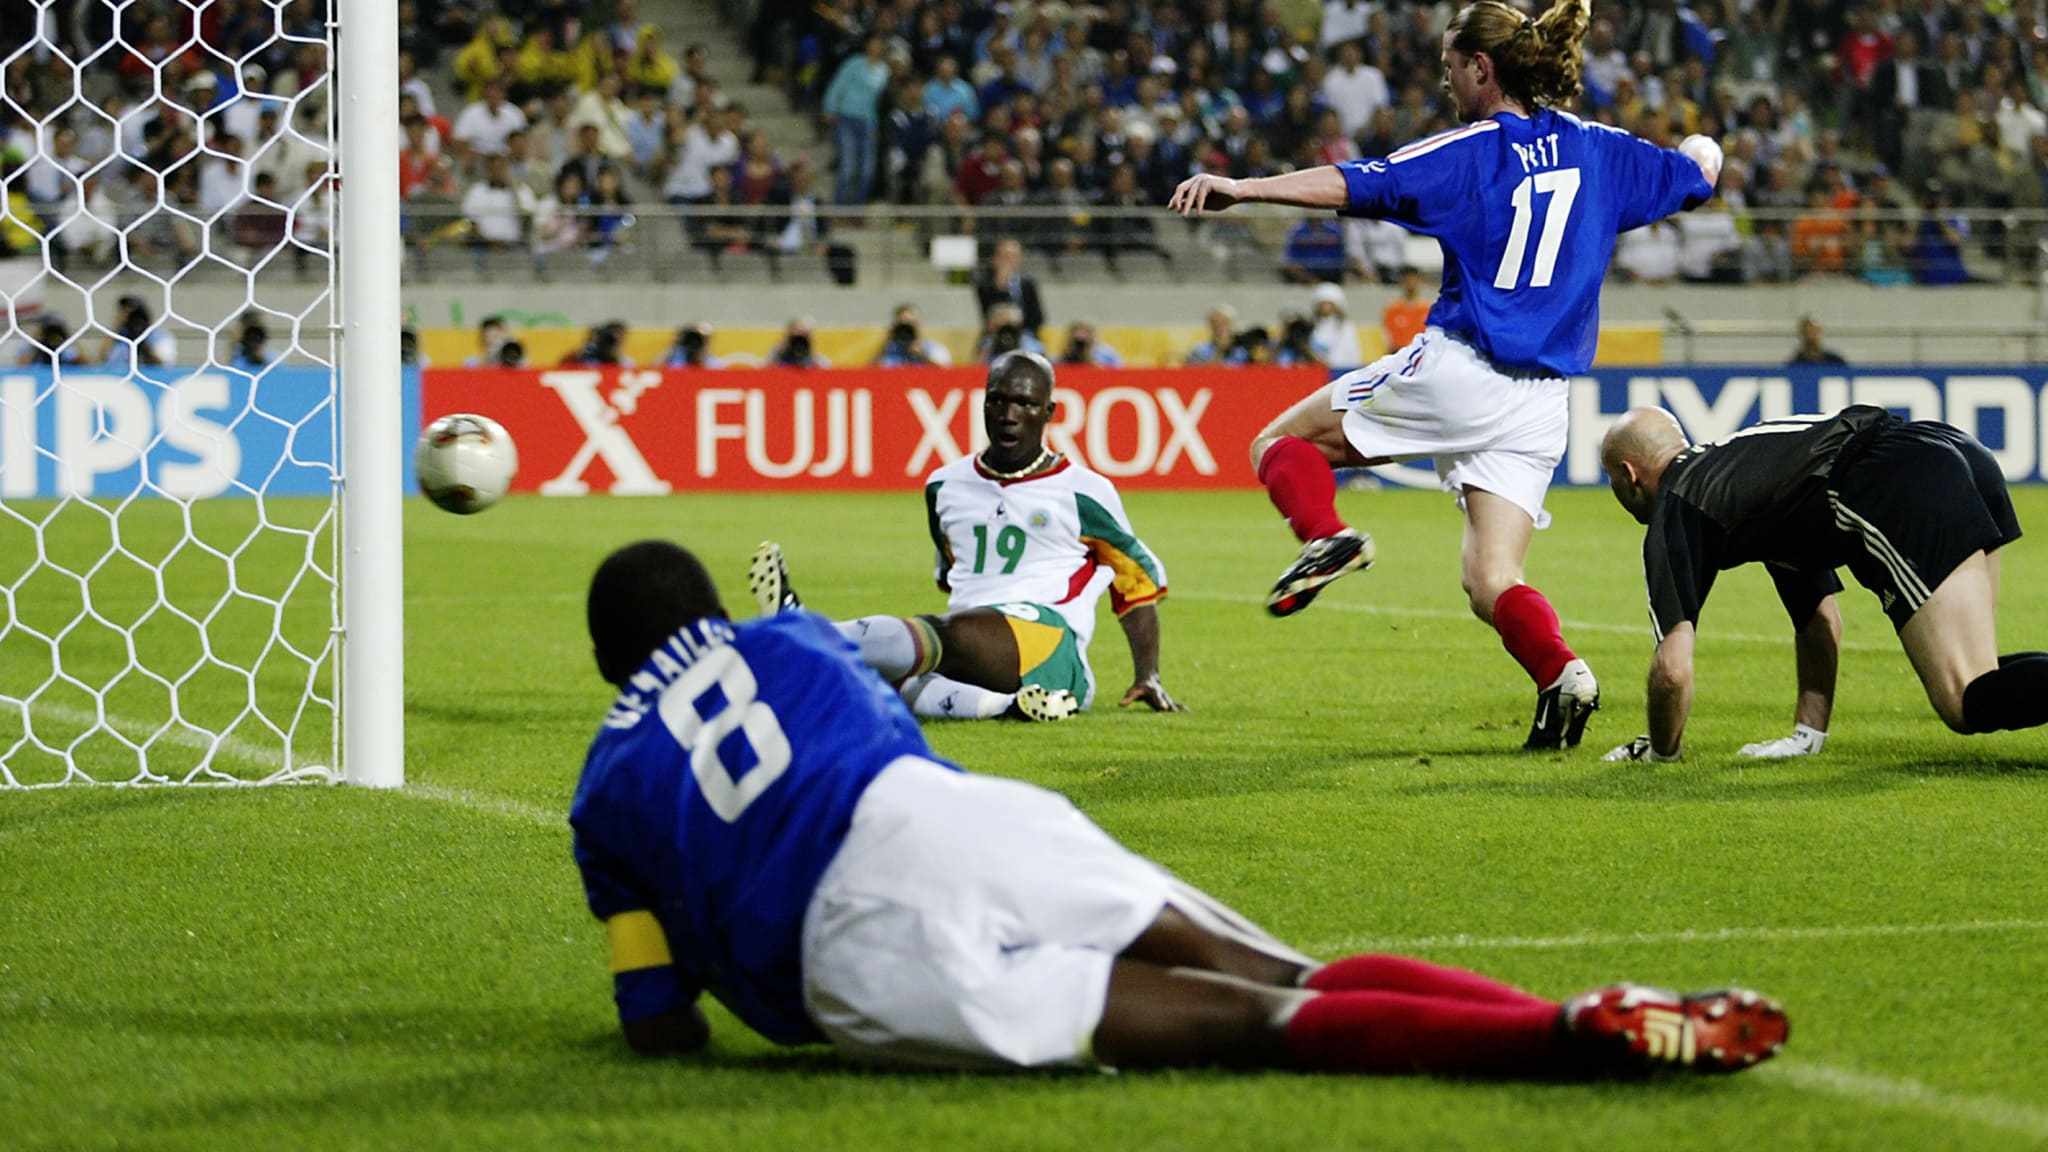 Senegal maybe used witchcraft on in 2002, says France's Emmanuel Petit